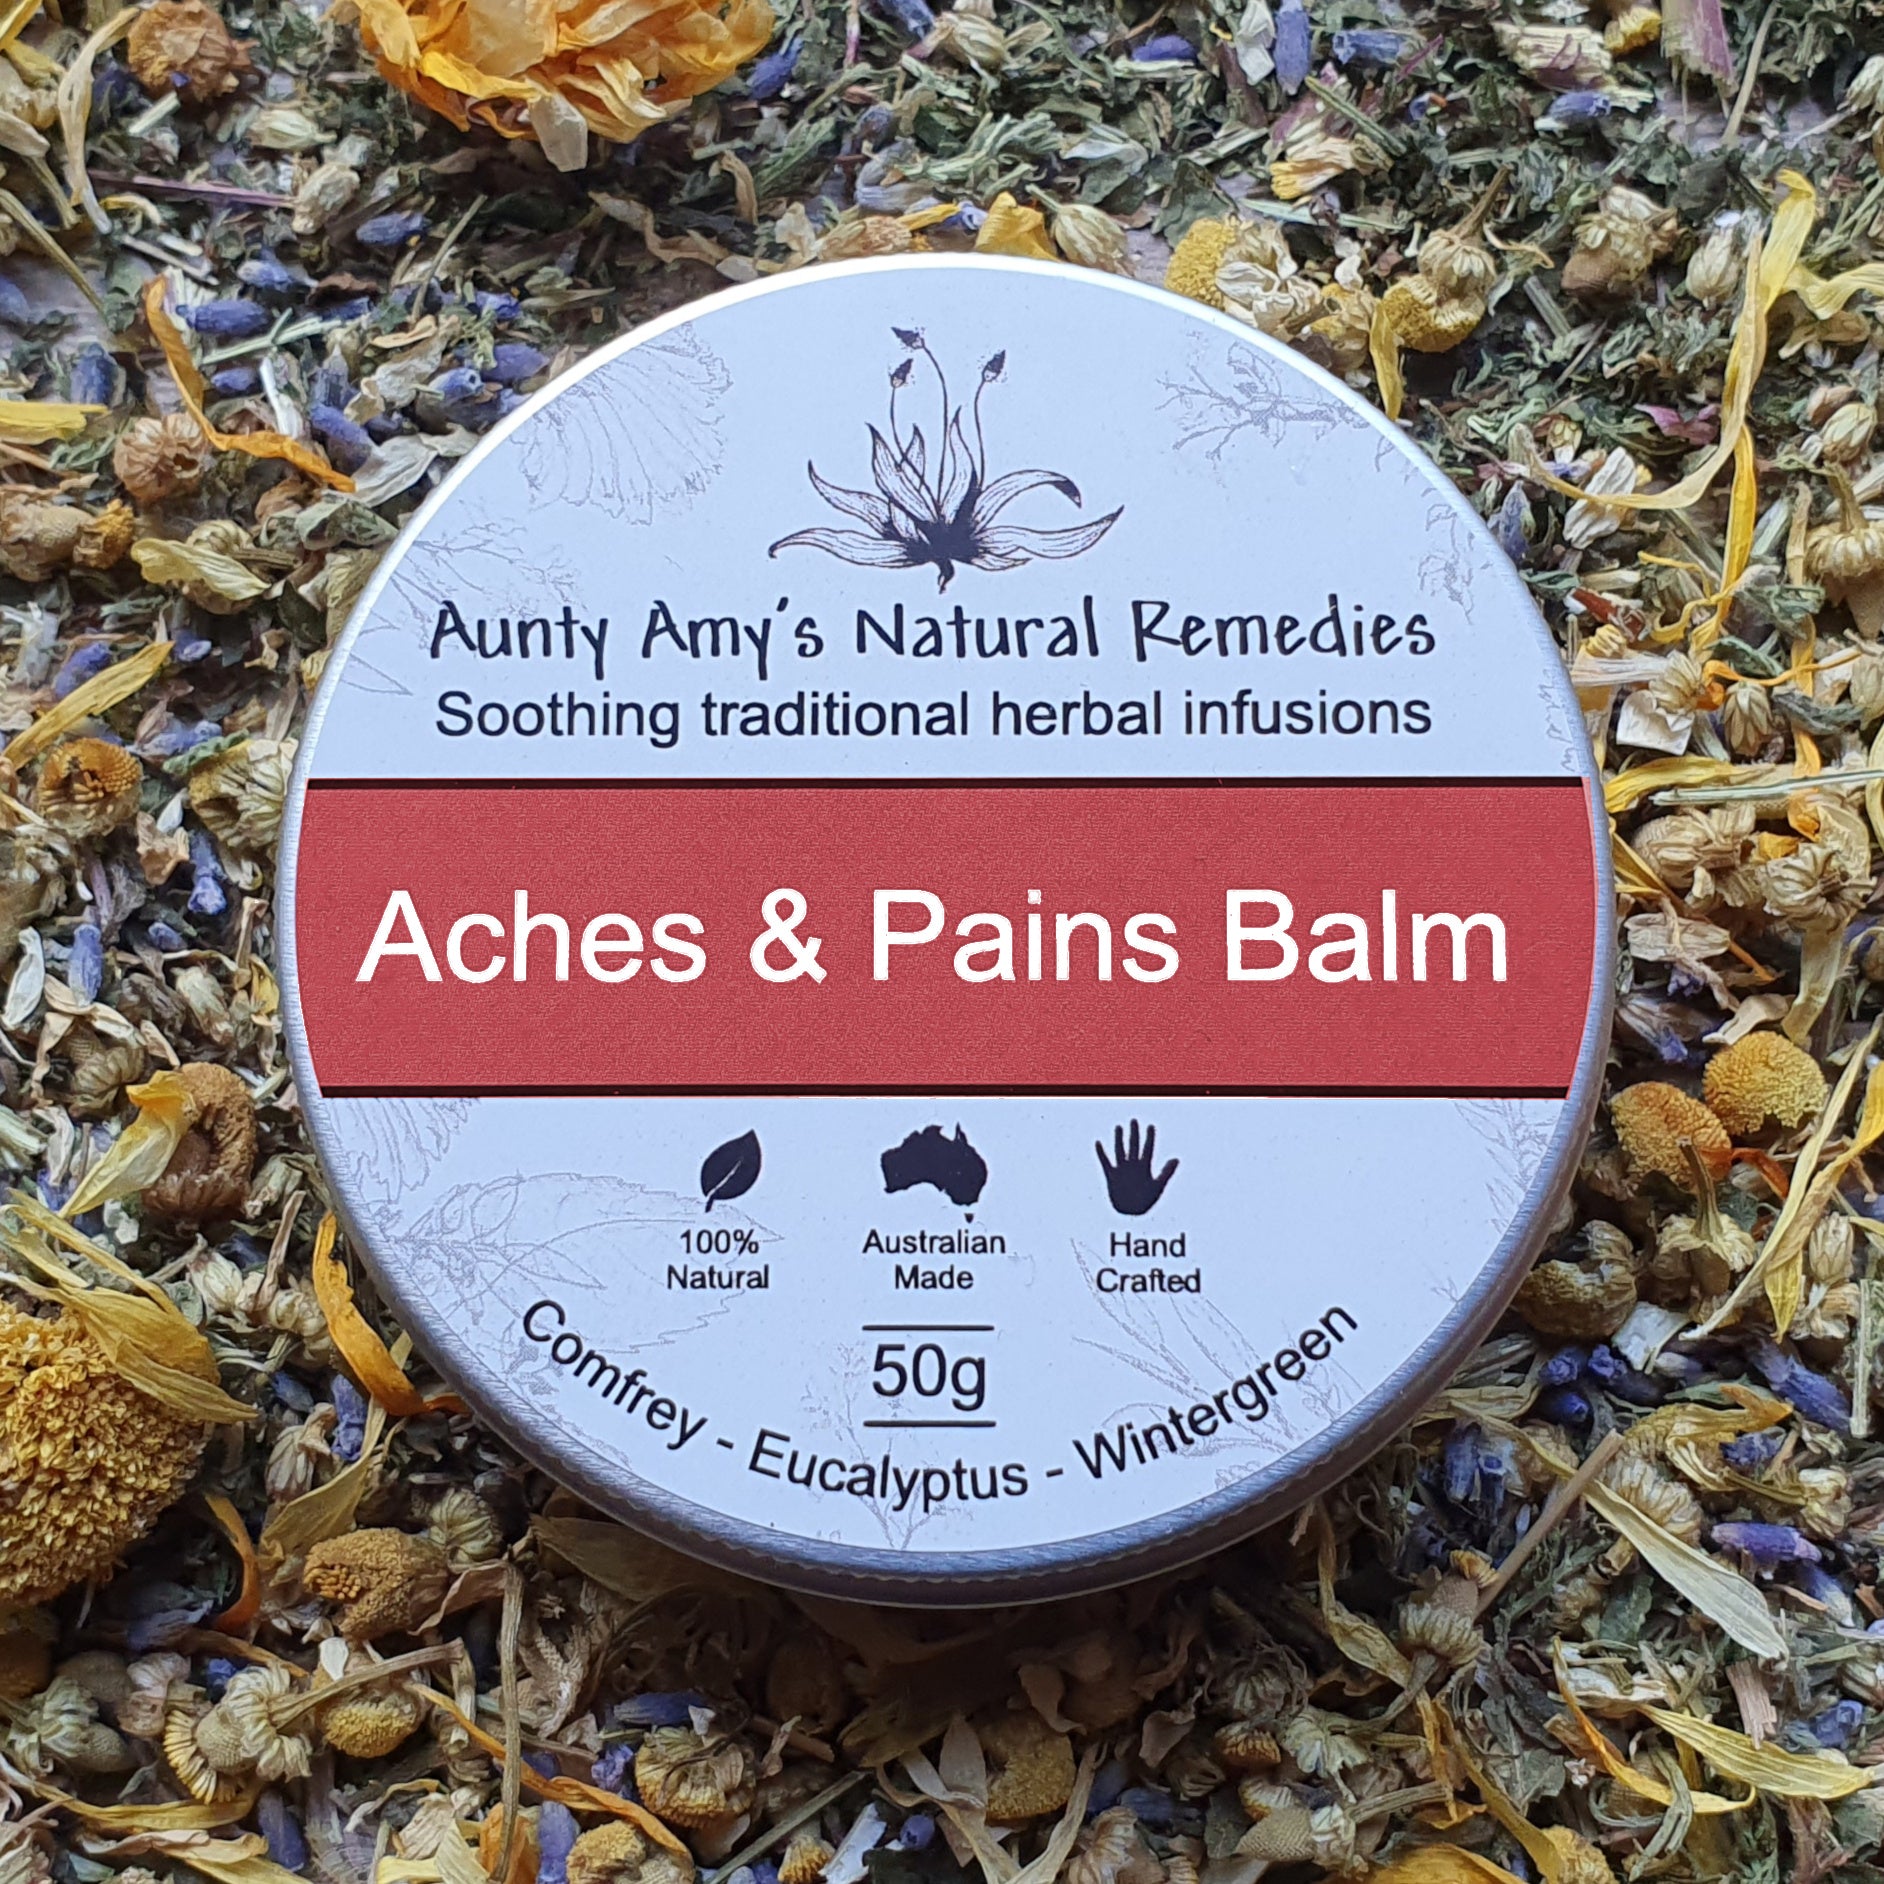 Aunty Amys - Natural Remedies Aches & Pains Balm